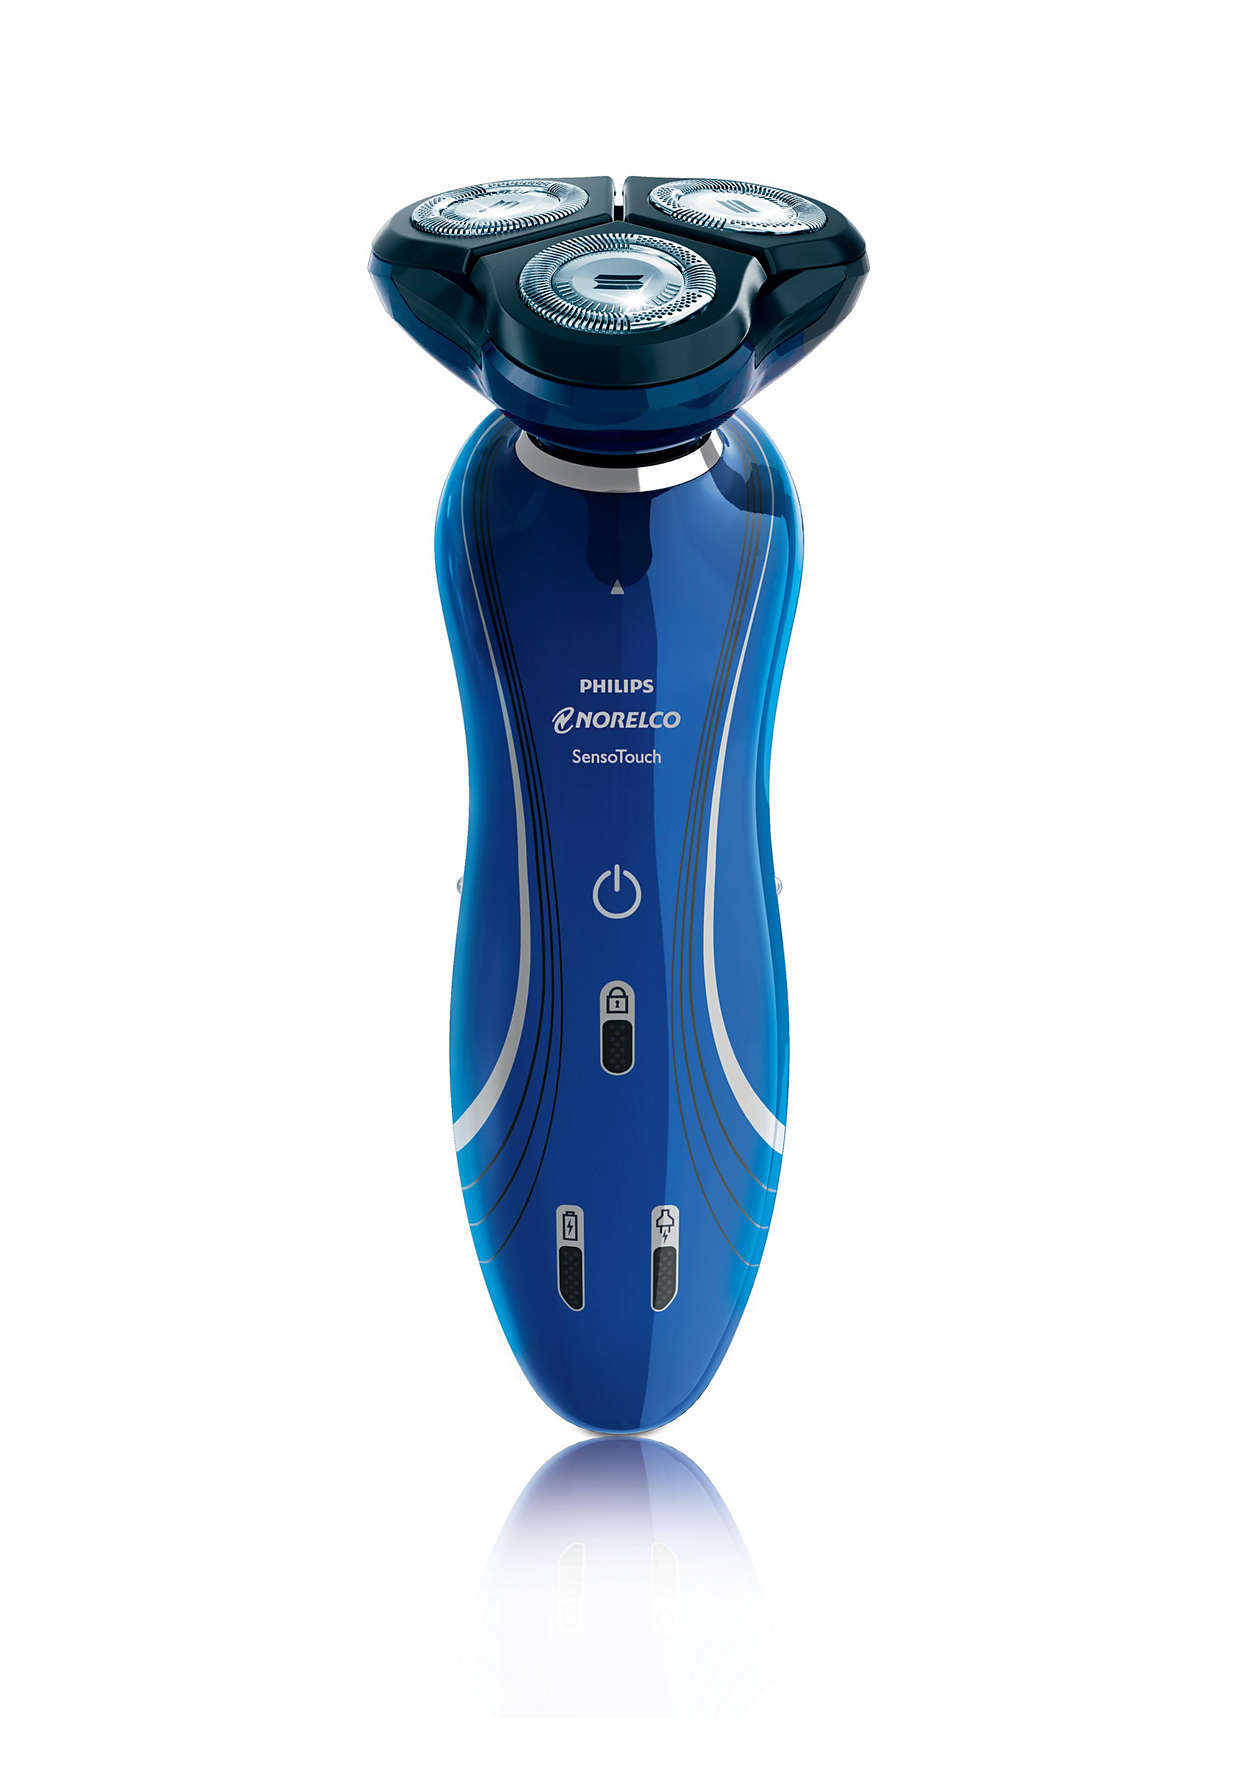 electric shavers philips norelco